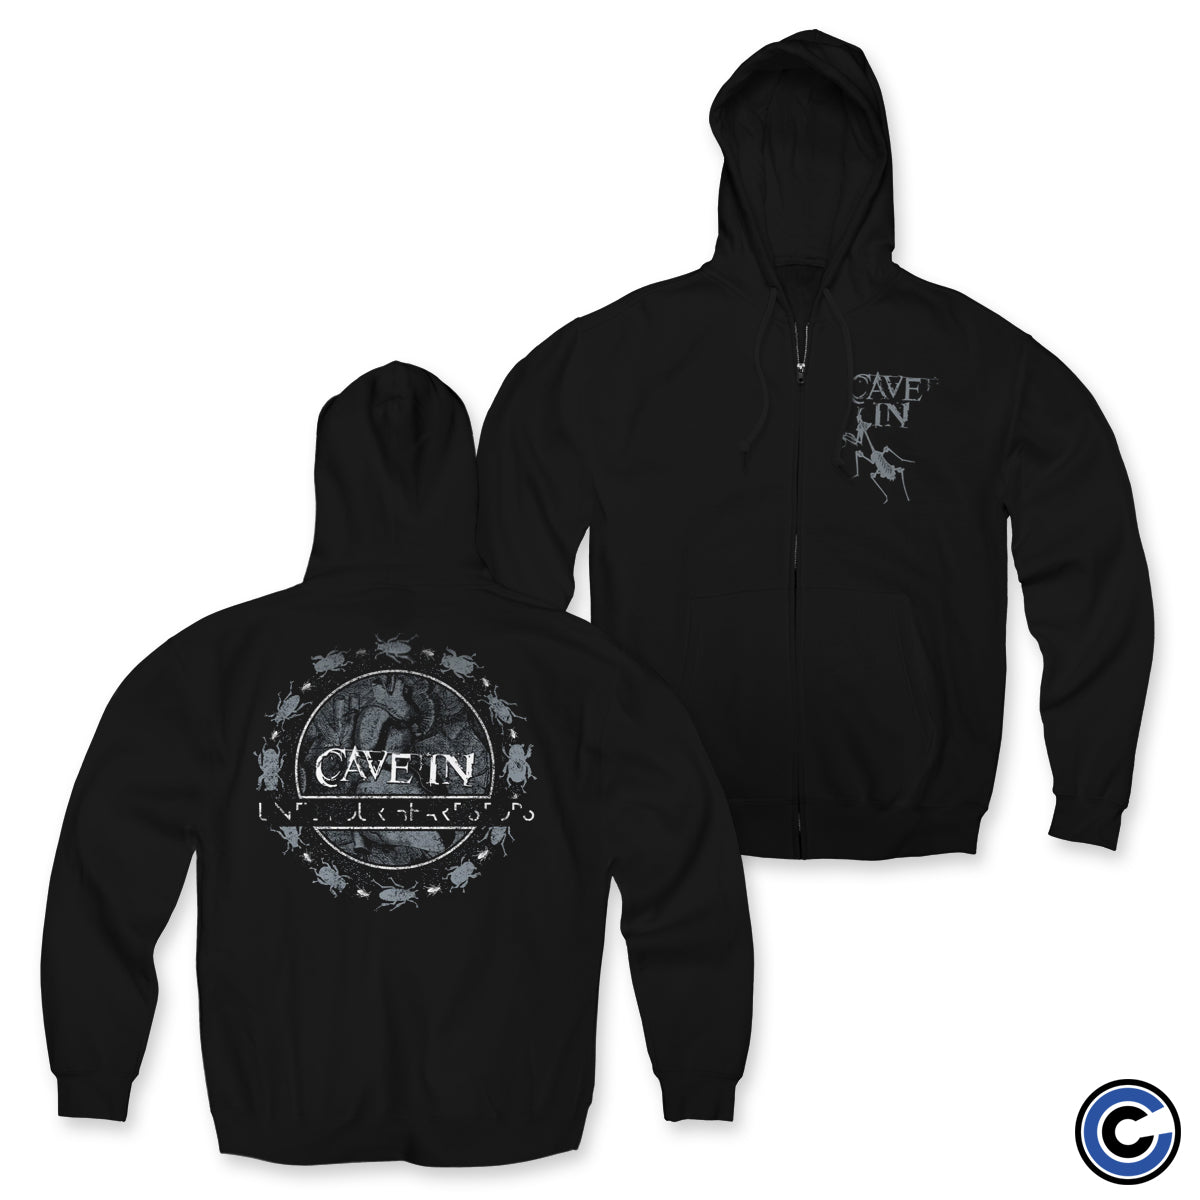 Cave In "Until Your Heart Stops" (Reissue) Hoodie